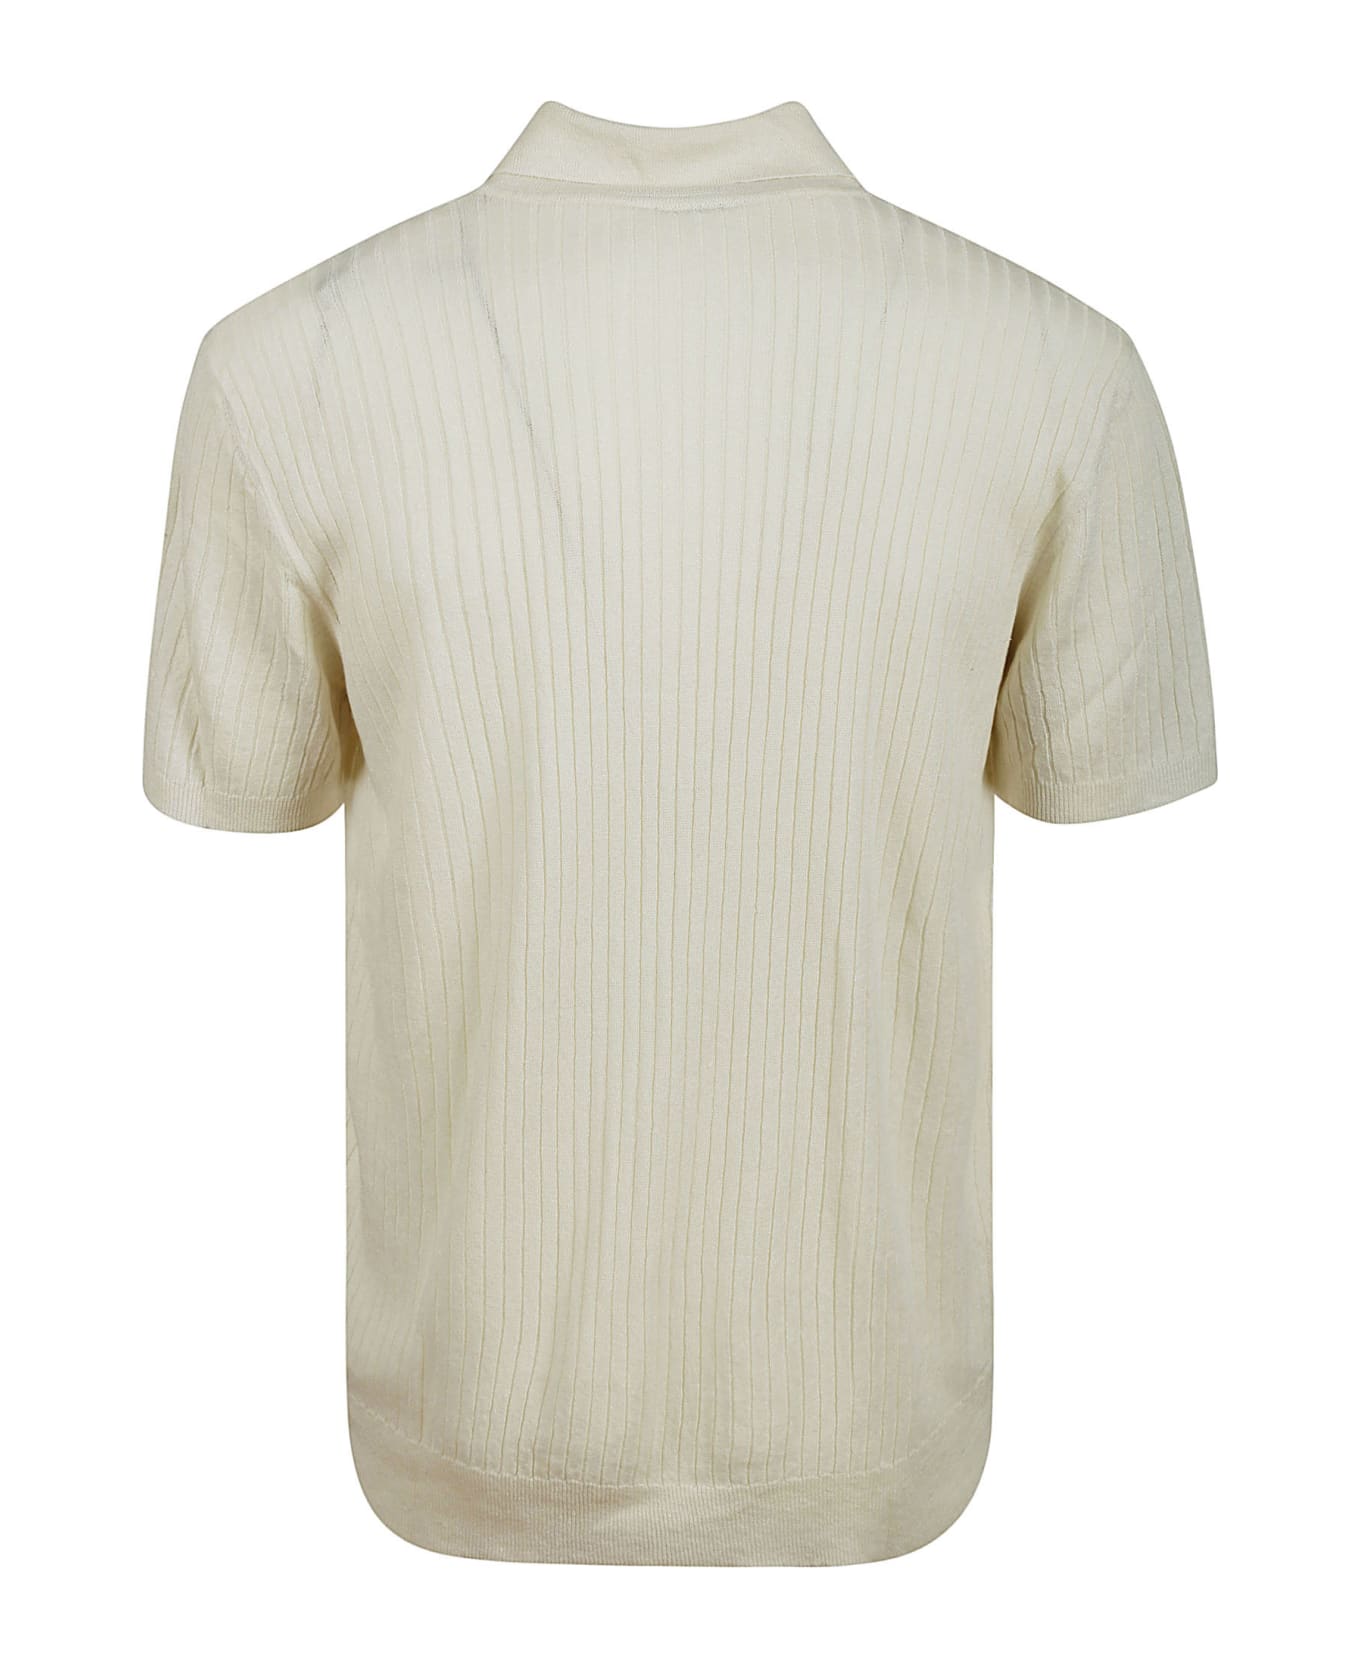 Barena Knitwear Marco - Ivory ポロシャツ